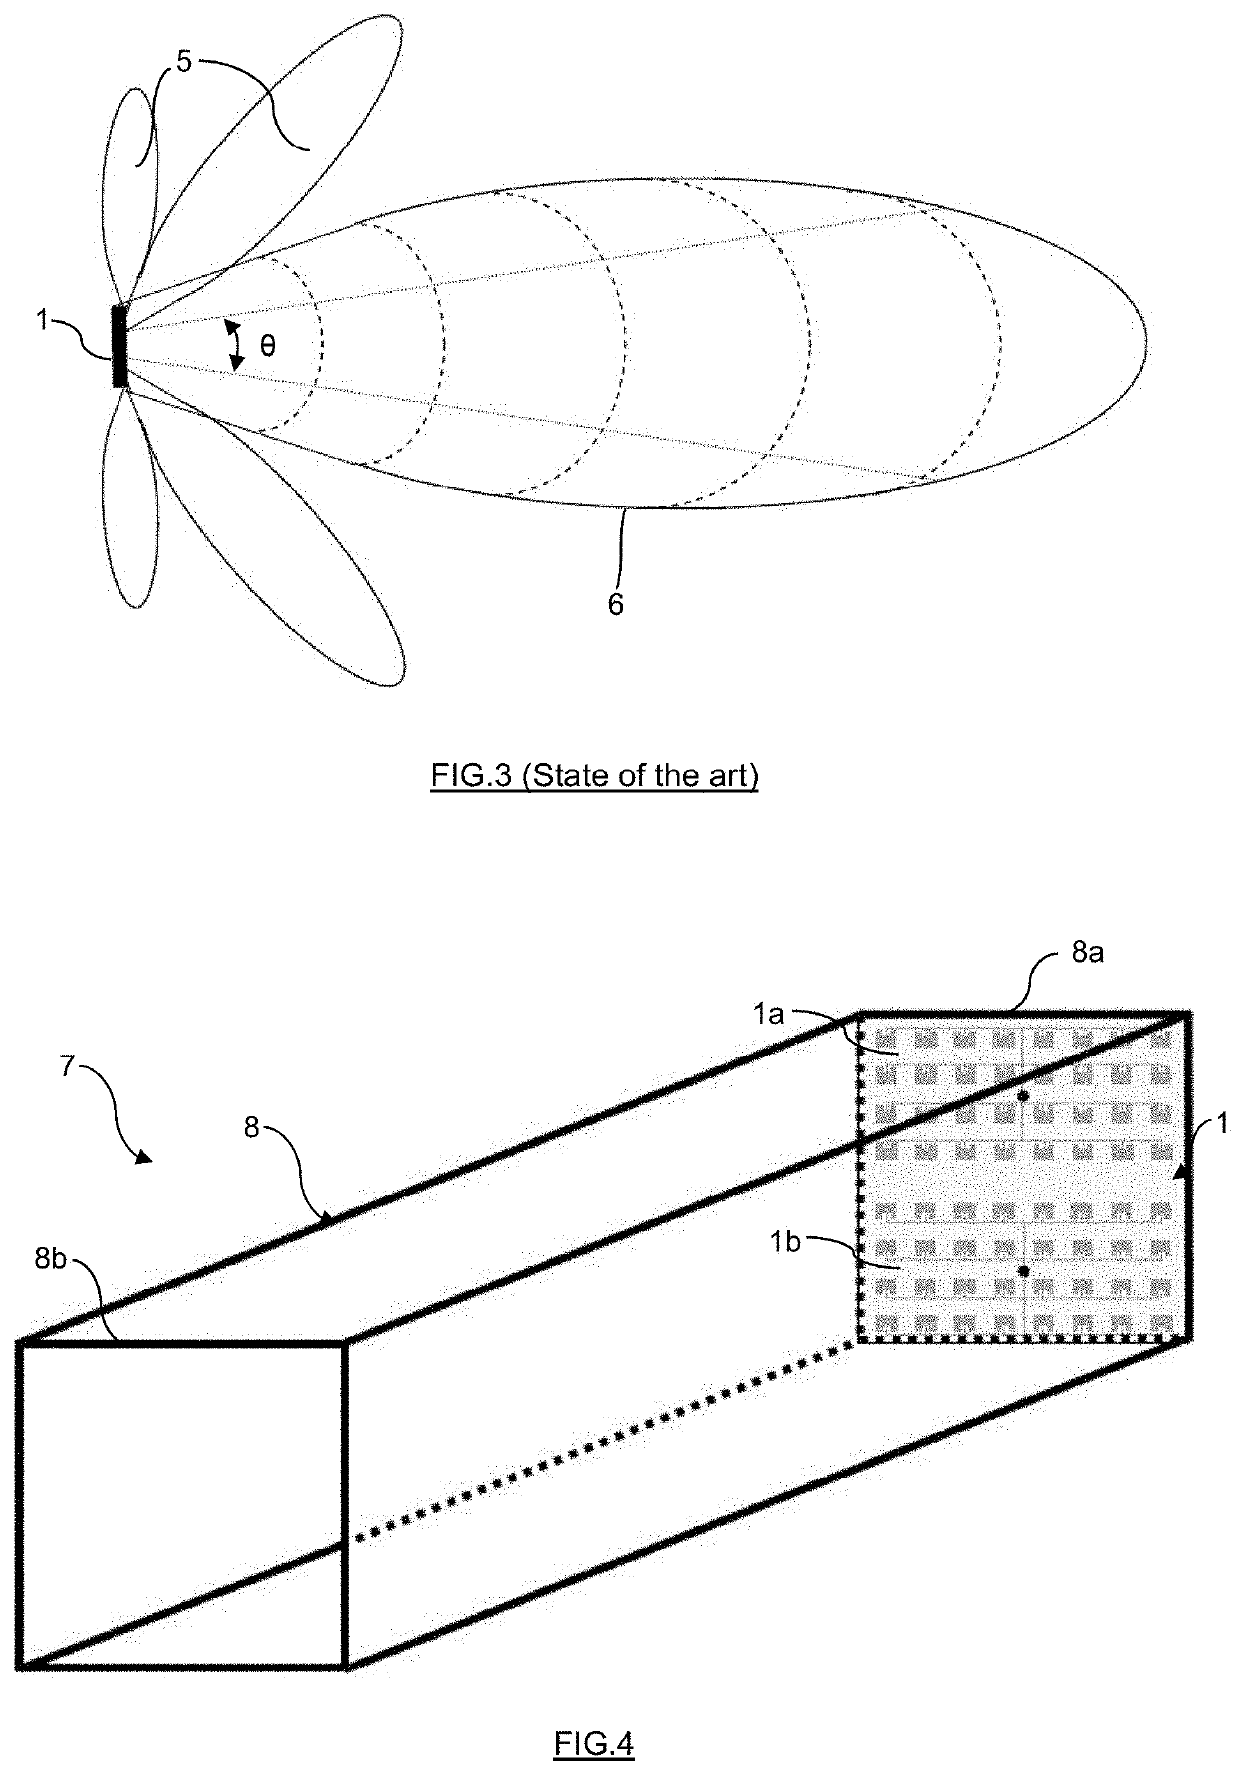 Method and device to measure the velocity of a fluid flowing in a confined space